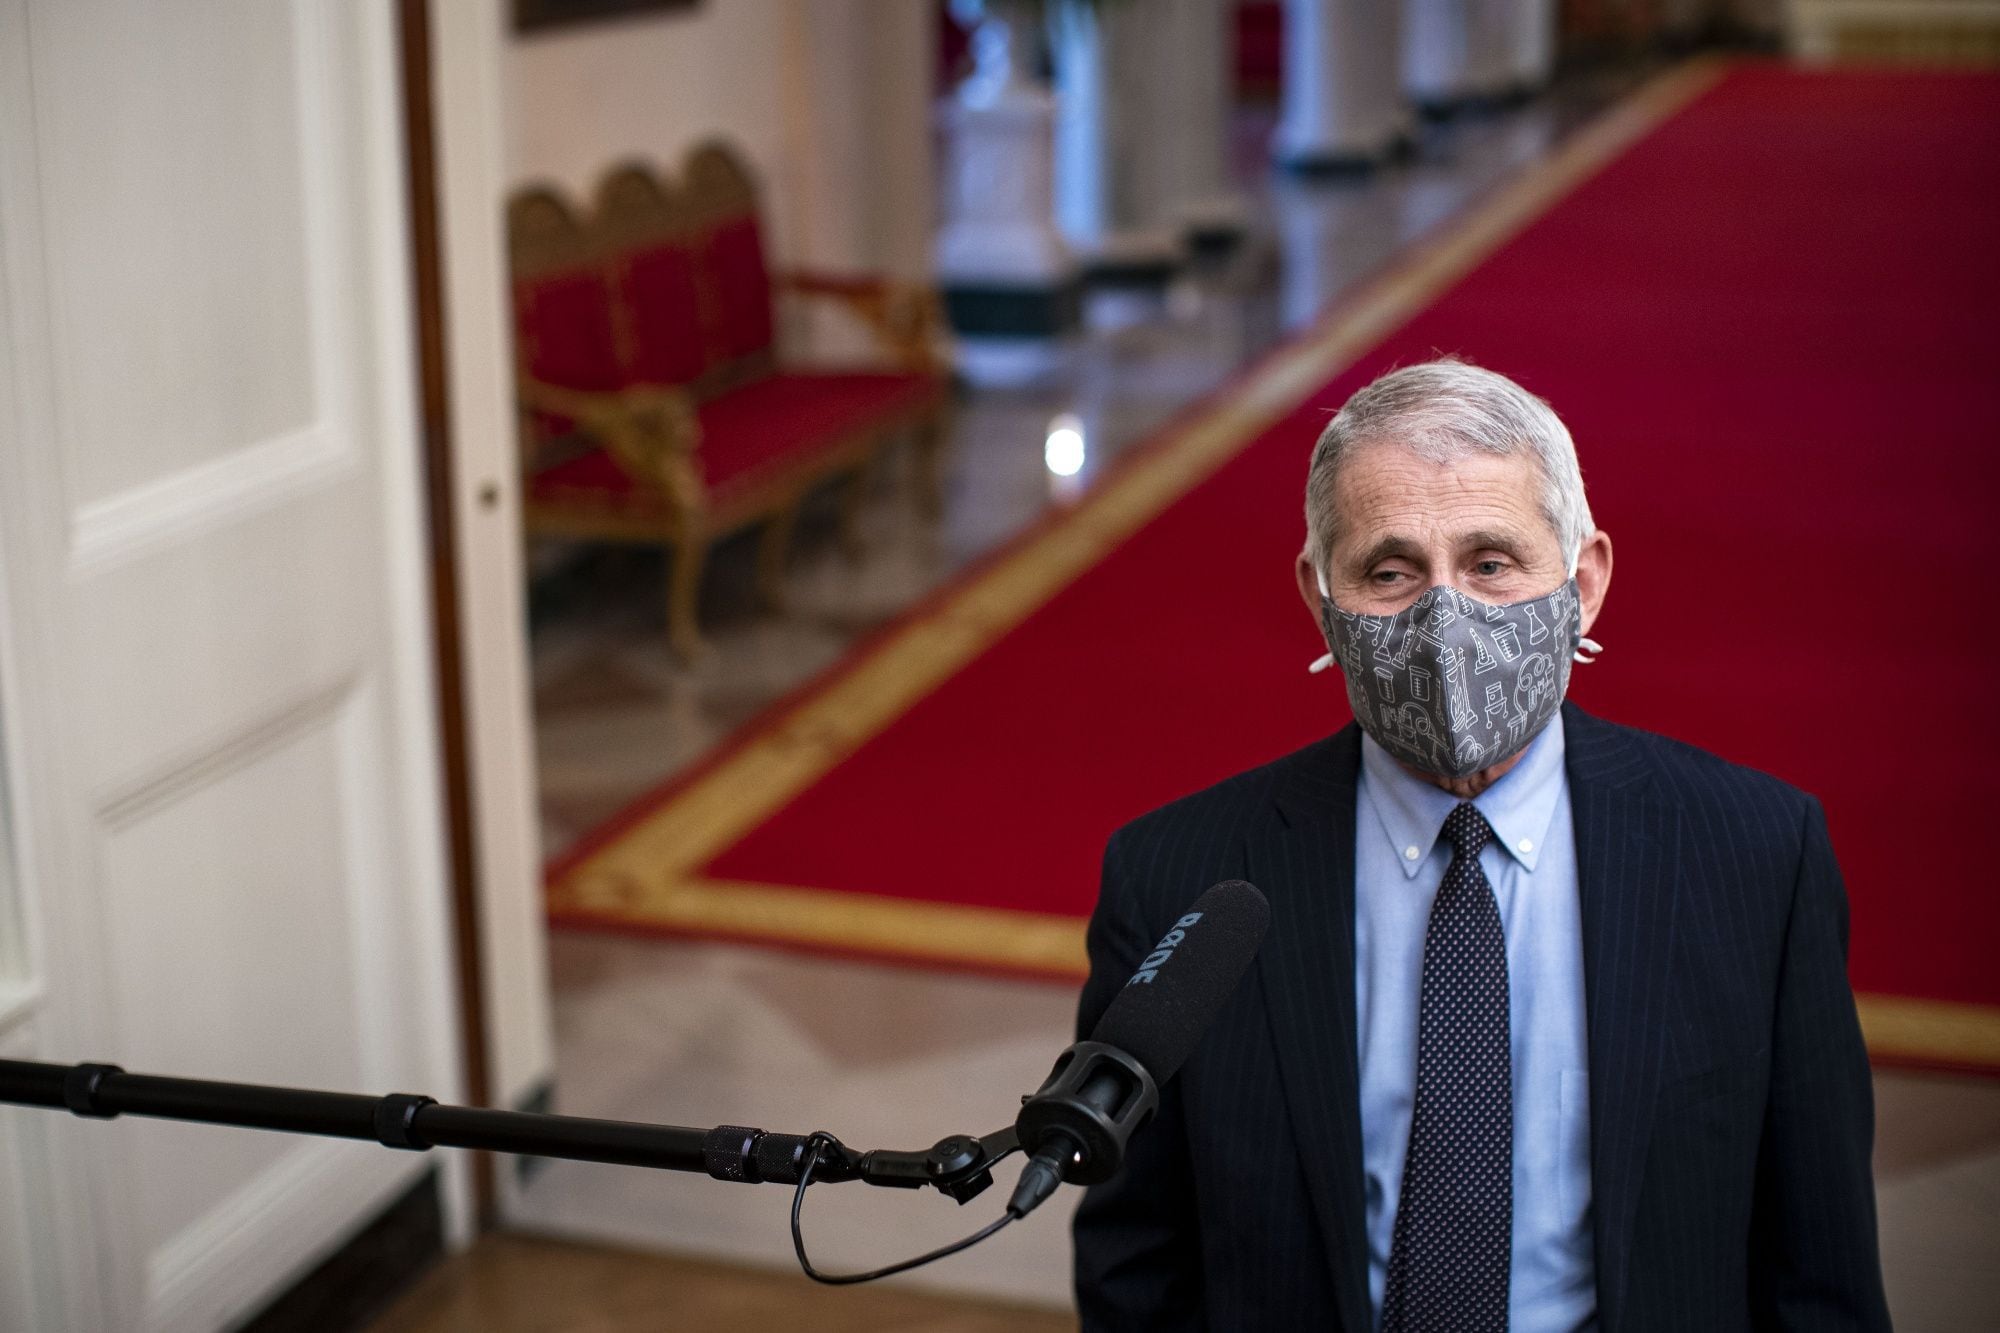 Anthony Fauci, director of the National Institute of Allergy and Infectious Diseases, wears a protective mask while speaking to members of the media before an event on the Biden administration's Covid-19 response in the State Dining Room of the White House in Washington, D.C., U.S., on Thursday, Jan. 21, 2021. Joe Biden in his first full day in office plans to issue a sweeping set of executive orders to tackle the raging Covid-19 pandemic that will rapidly reverse or refashion many of his predecessor's most heavily criticized policies.